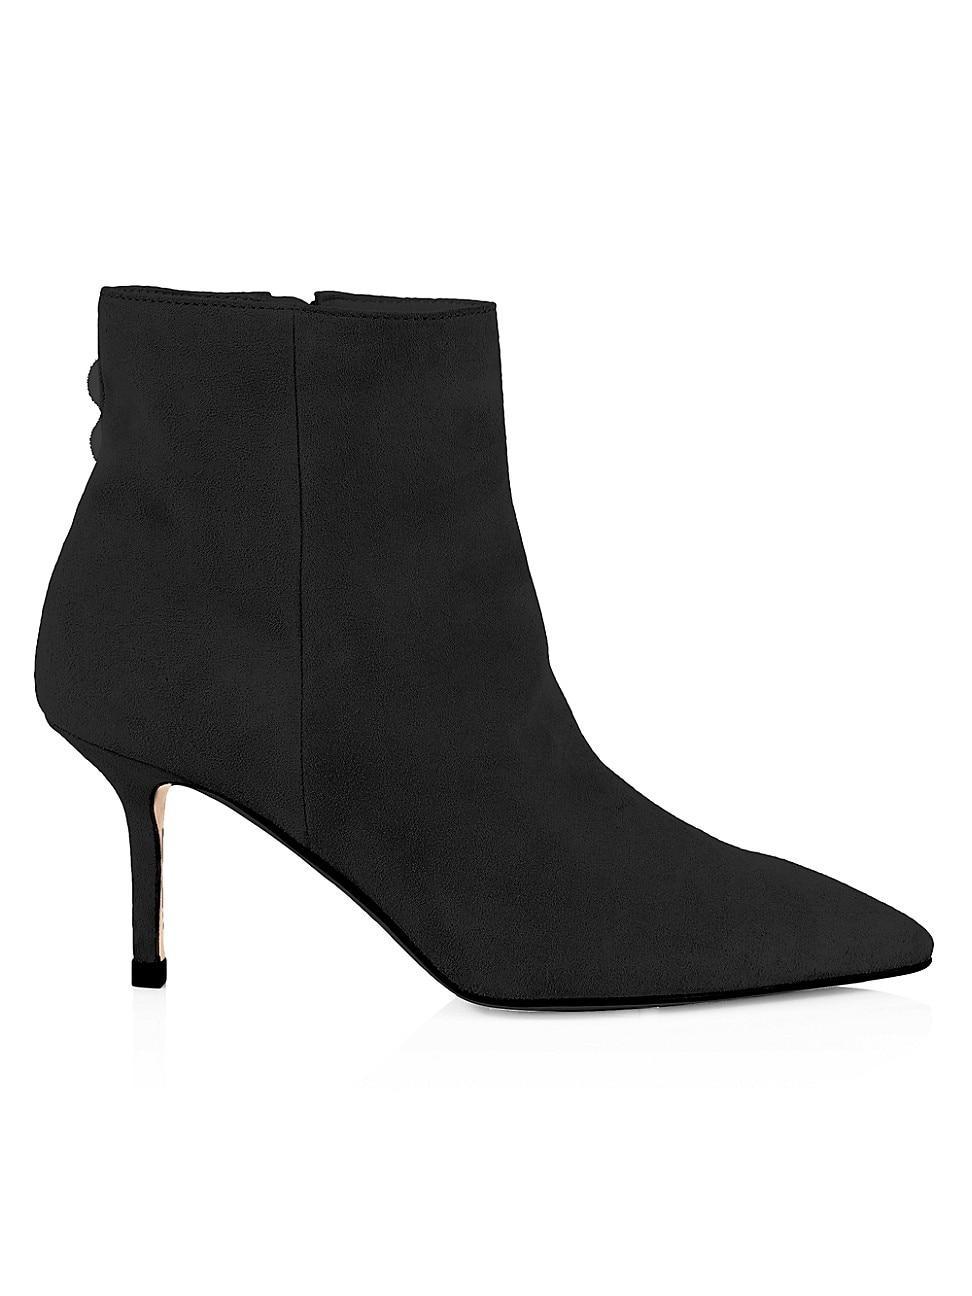 Womens Aimee Suede Ankle Boots Product Image